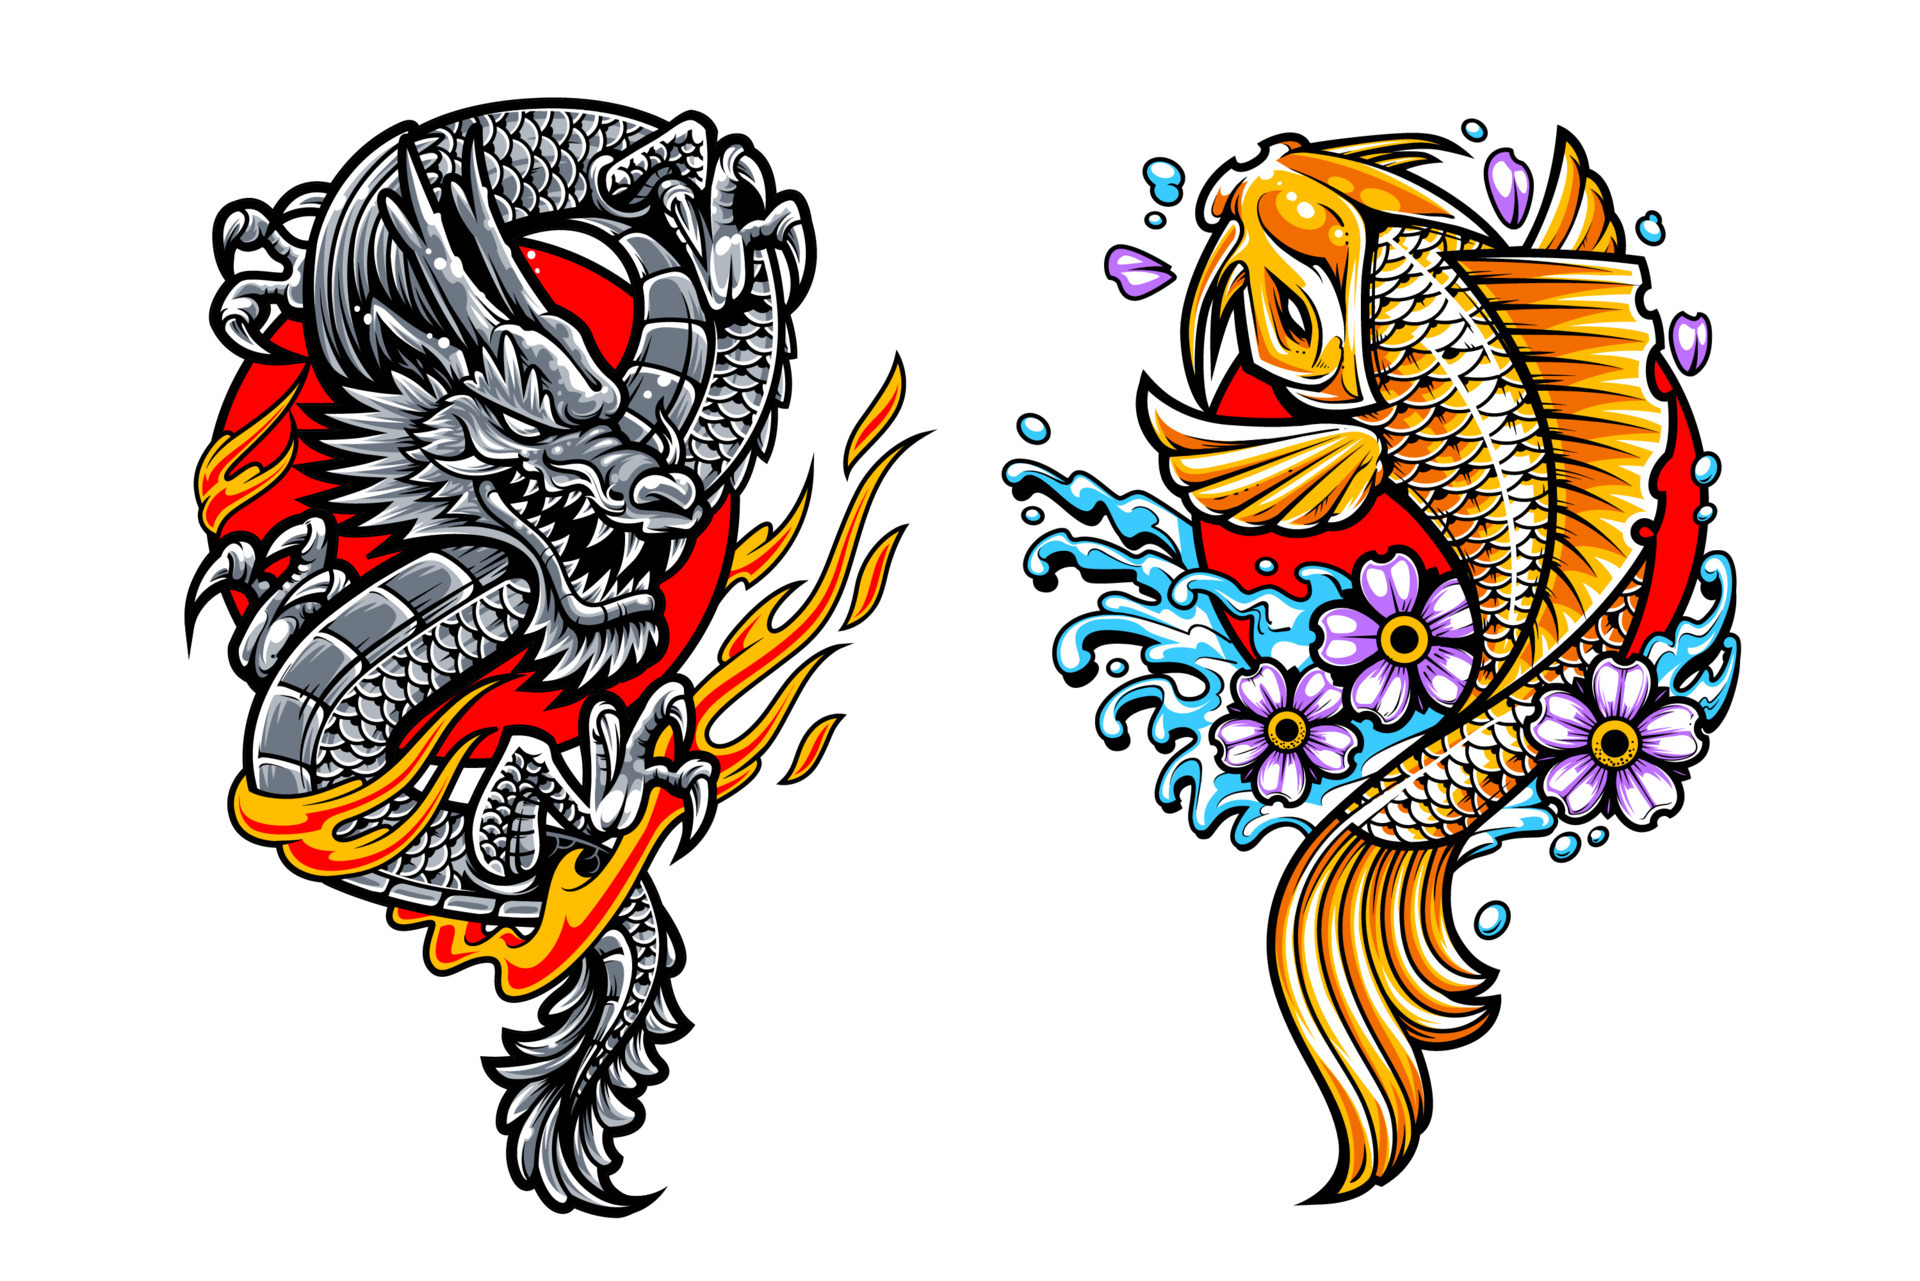 Dragon and Koi Fish Tattoo: A Powerful Combination - wide 2